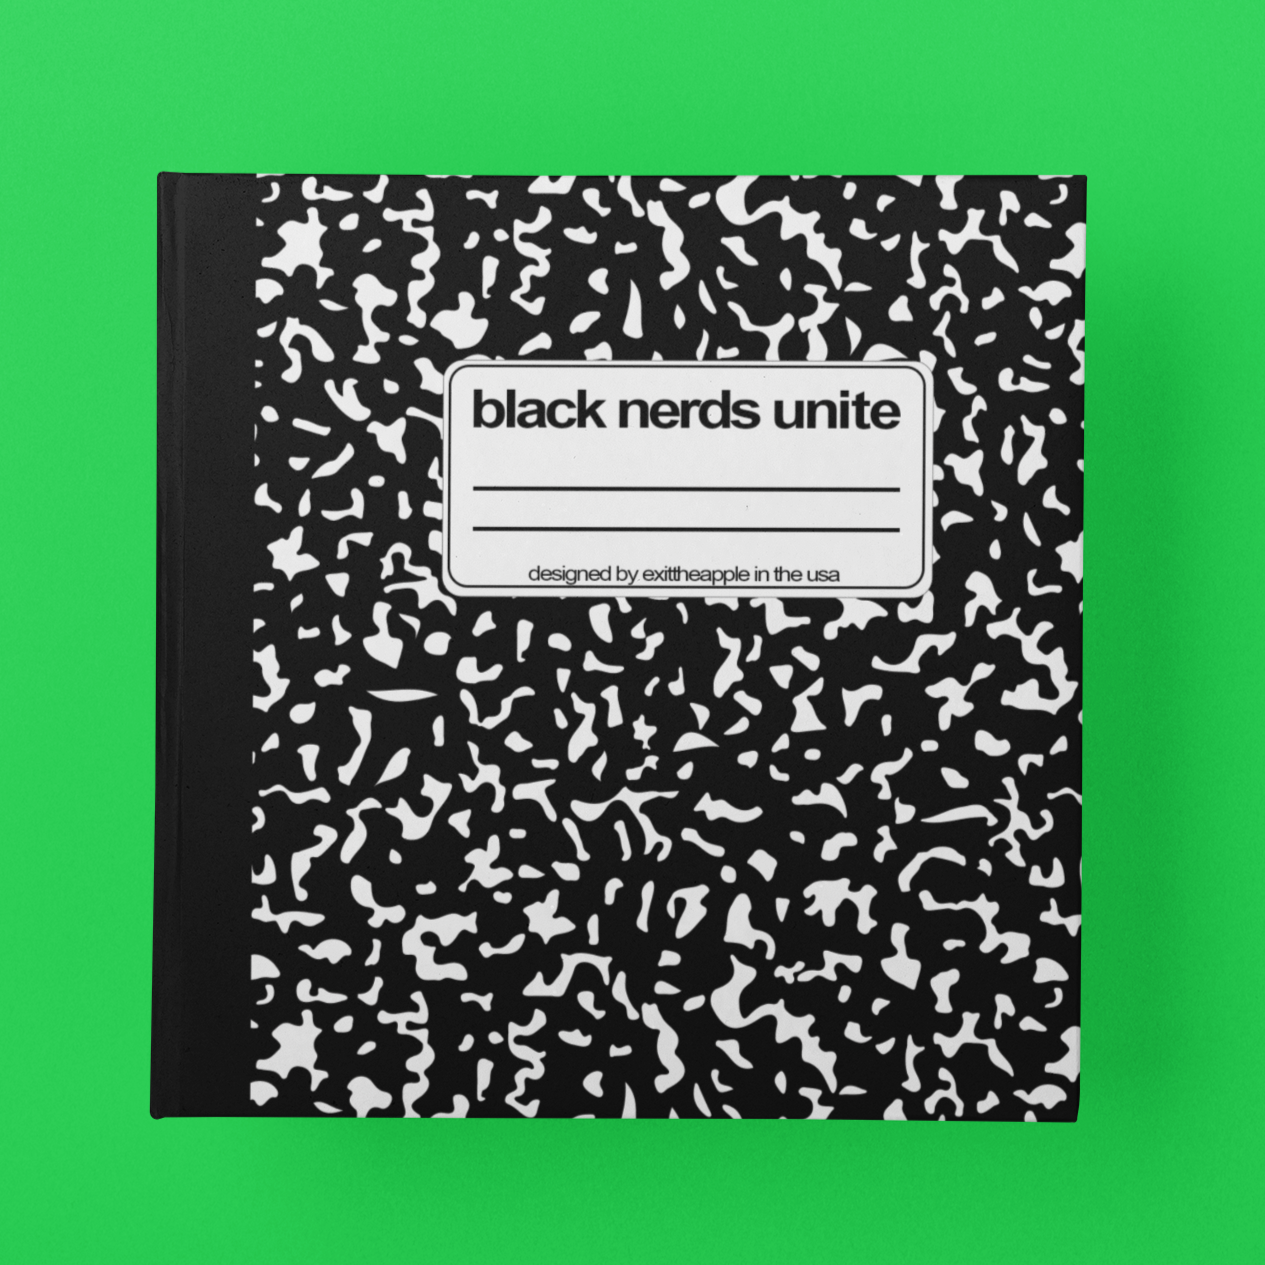 mockup of square journal with composition book design. text reads "black nerfs unite" in a small white box on the cover. 